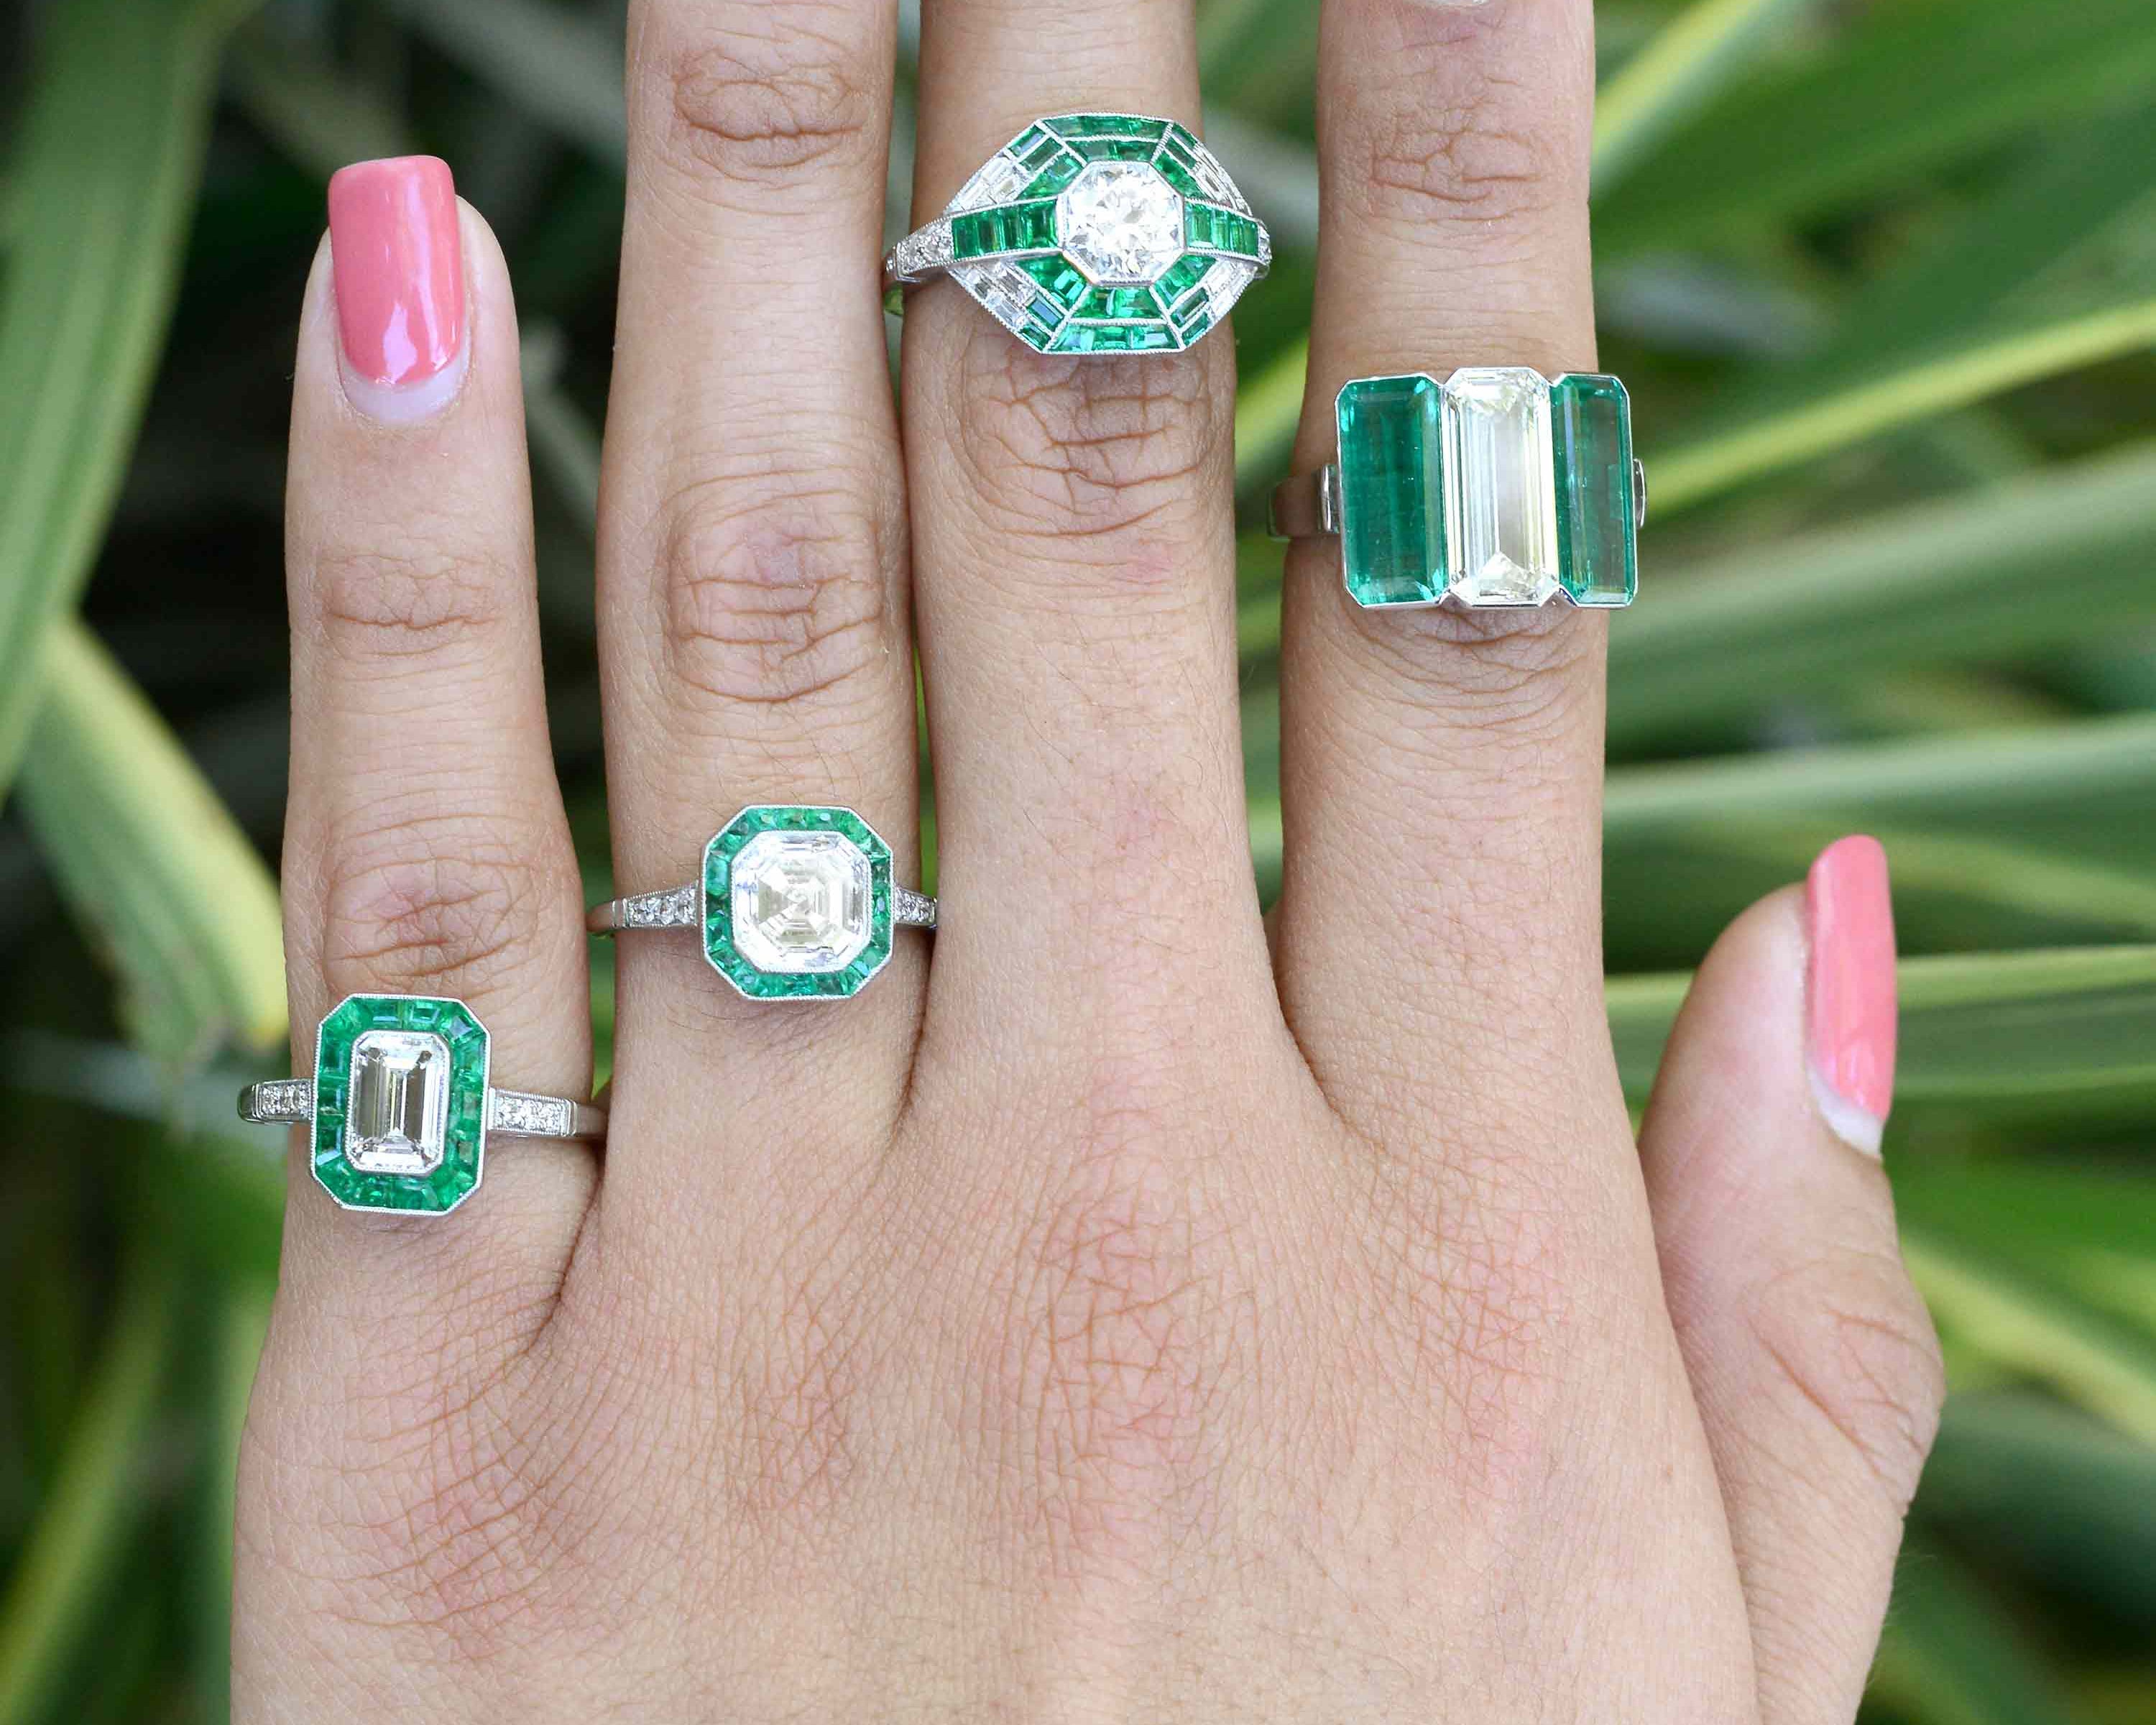 Some of our newly acquired diamond and emerald platinum wedding rings.